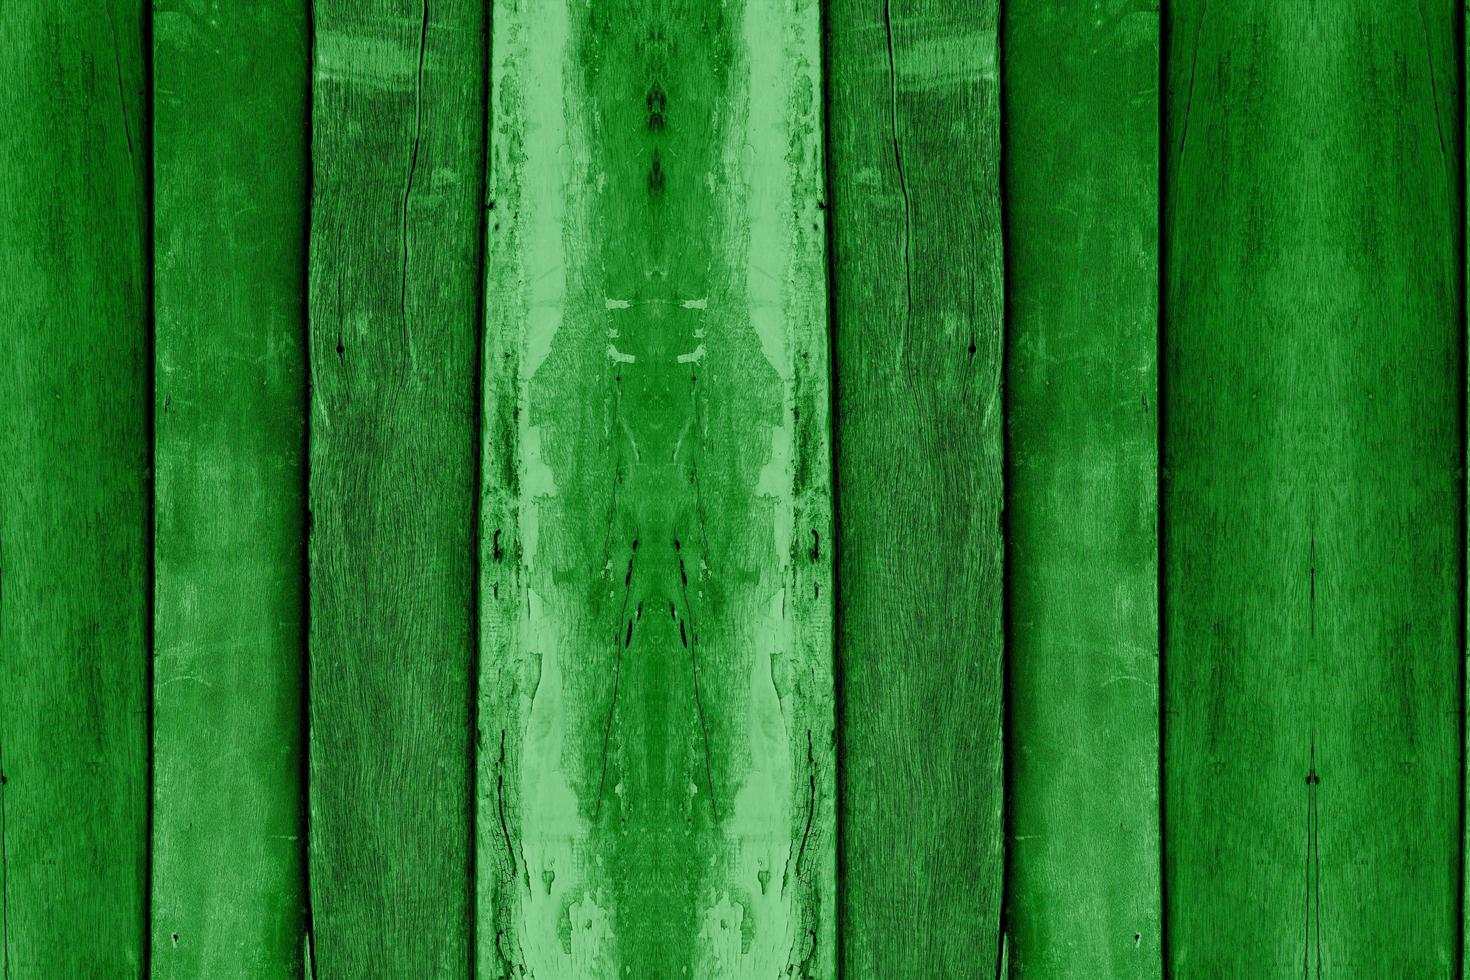 green wood plank texture,abstract background, ideas graphic design for web design or banner photo